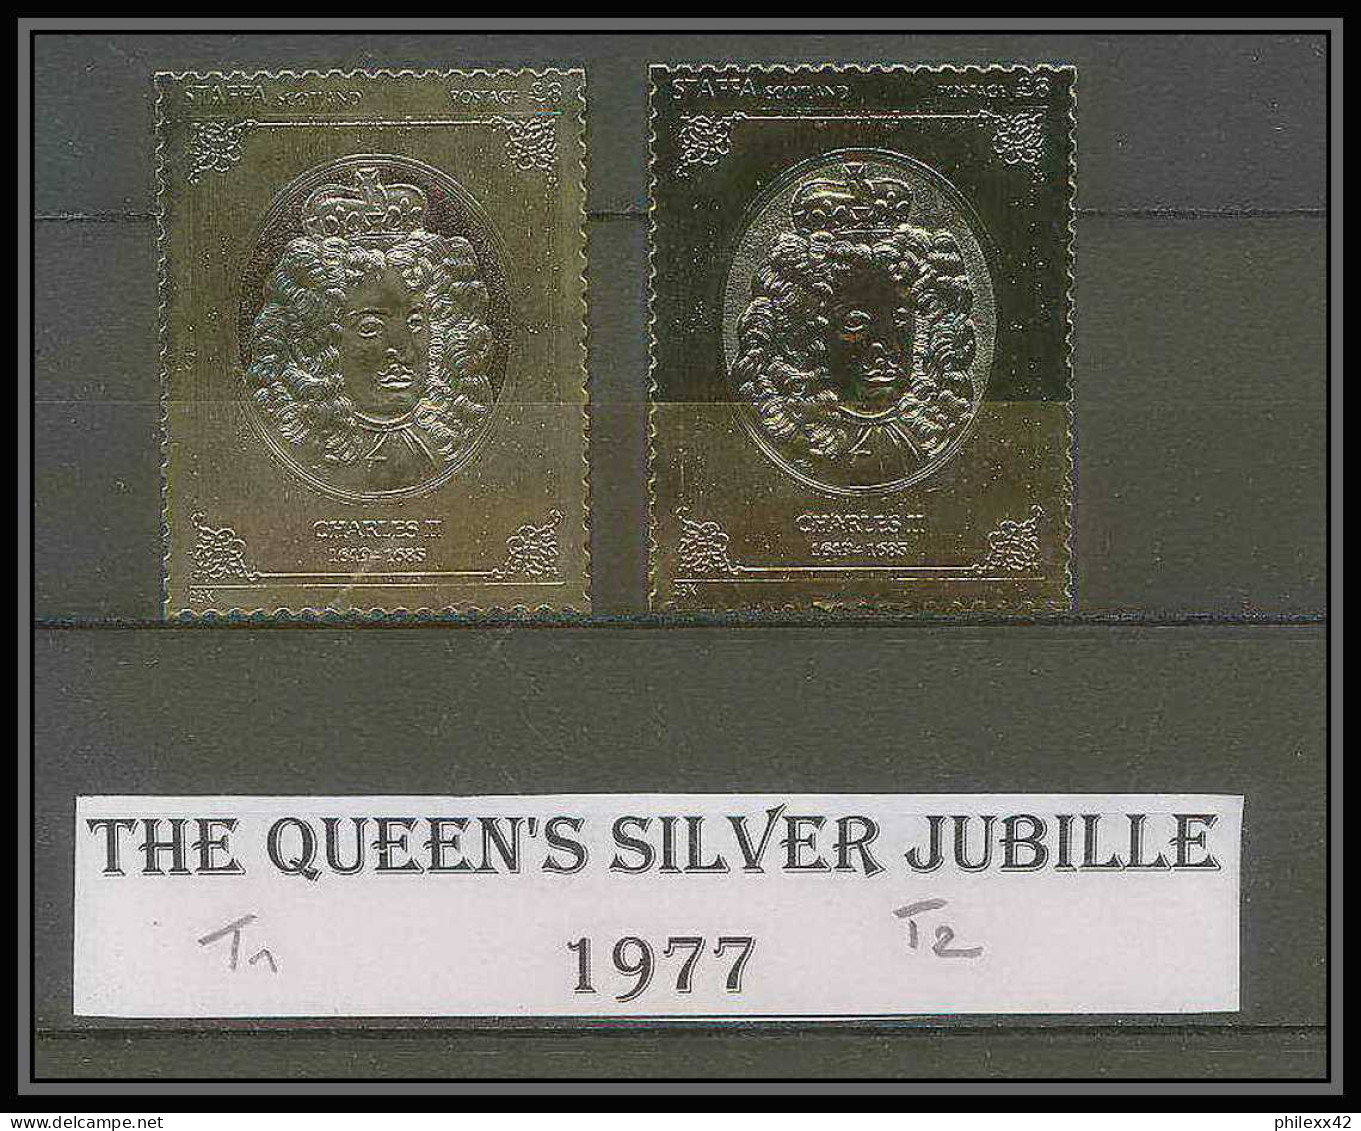 462a Staffa Scotland The Queen's Silver Jubilee 1977 OR Gold Stamps Monarchy United Kingdom Charles 2 Type 1& 2 ** - Scotland